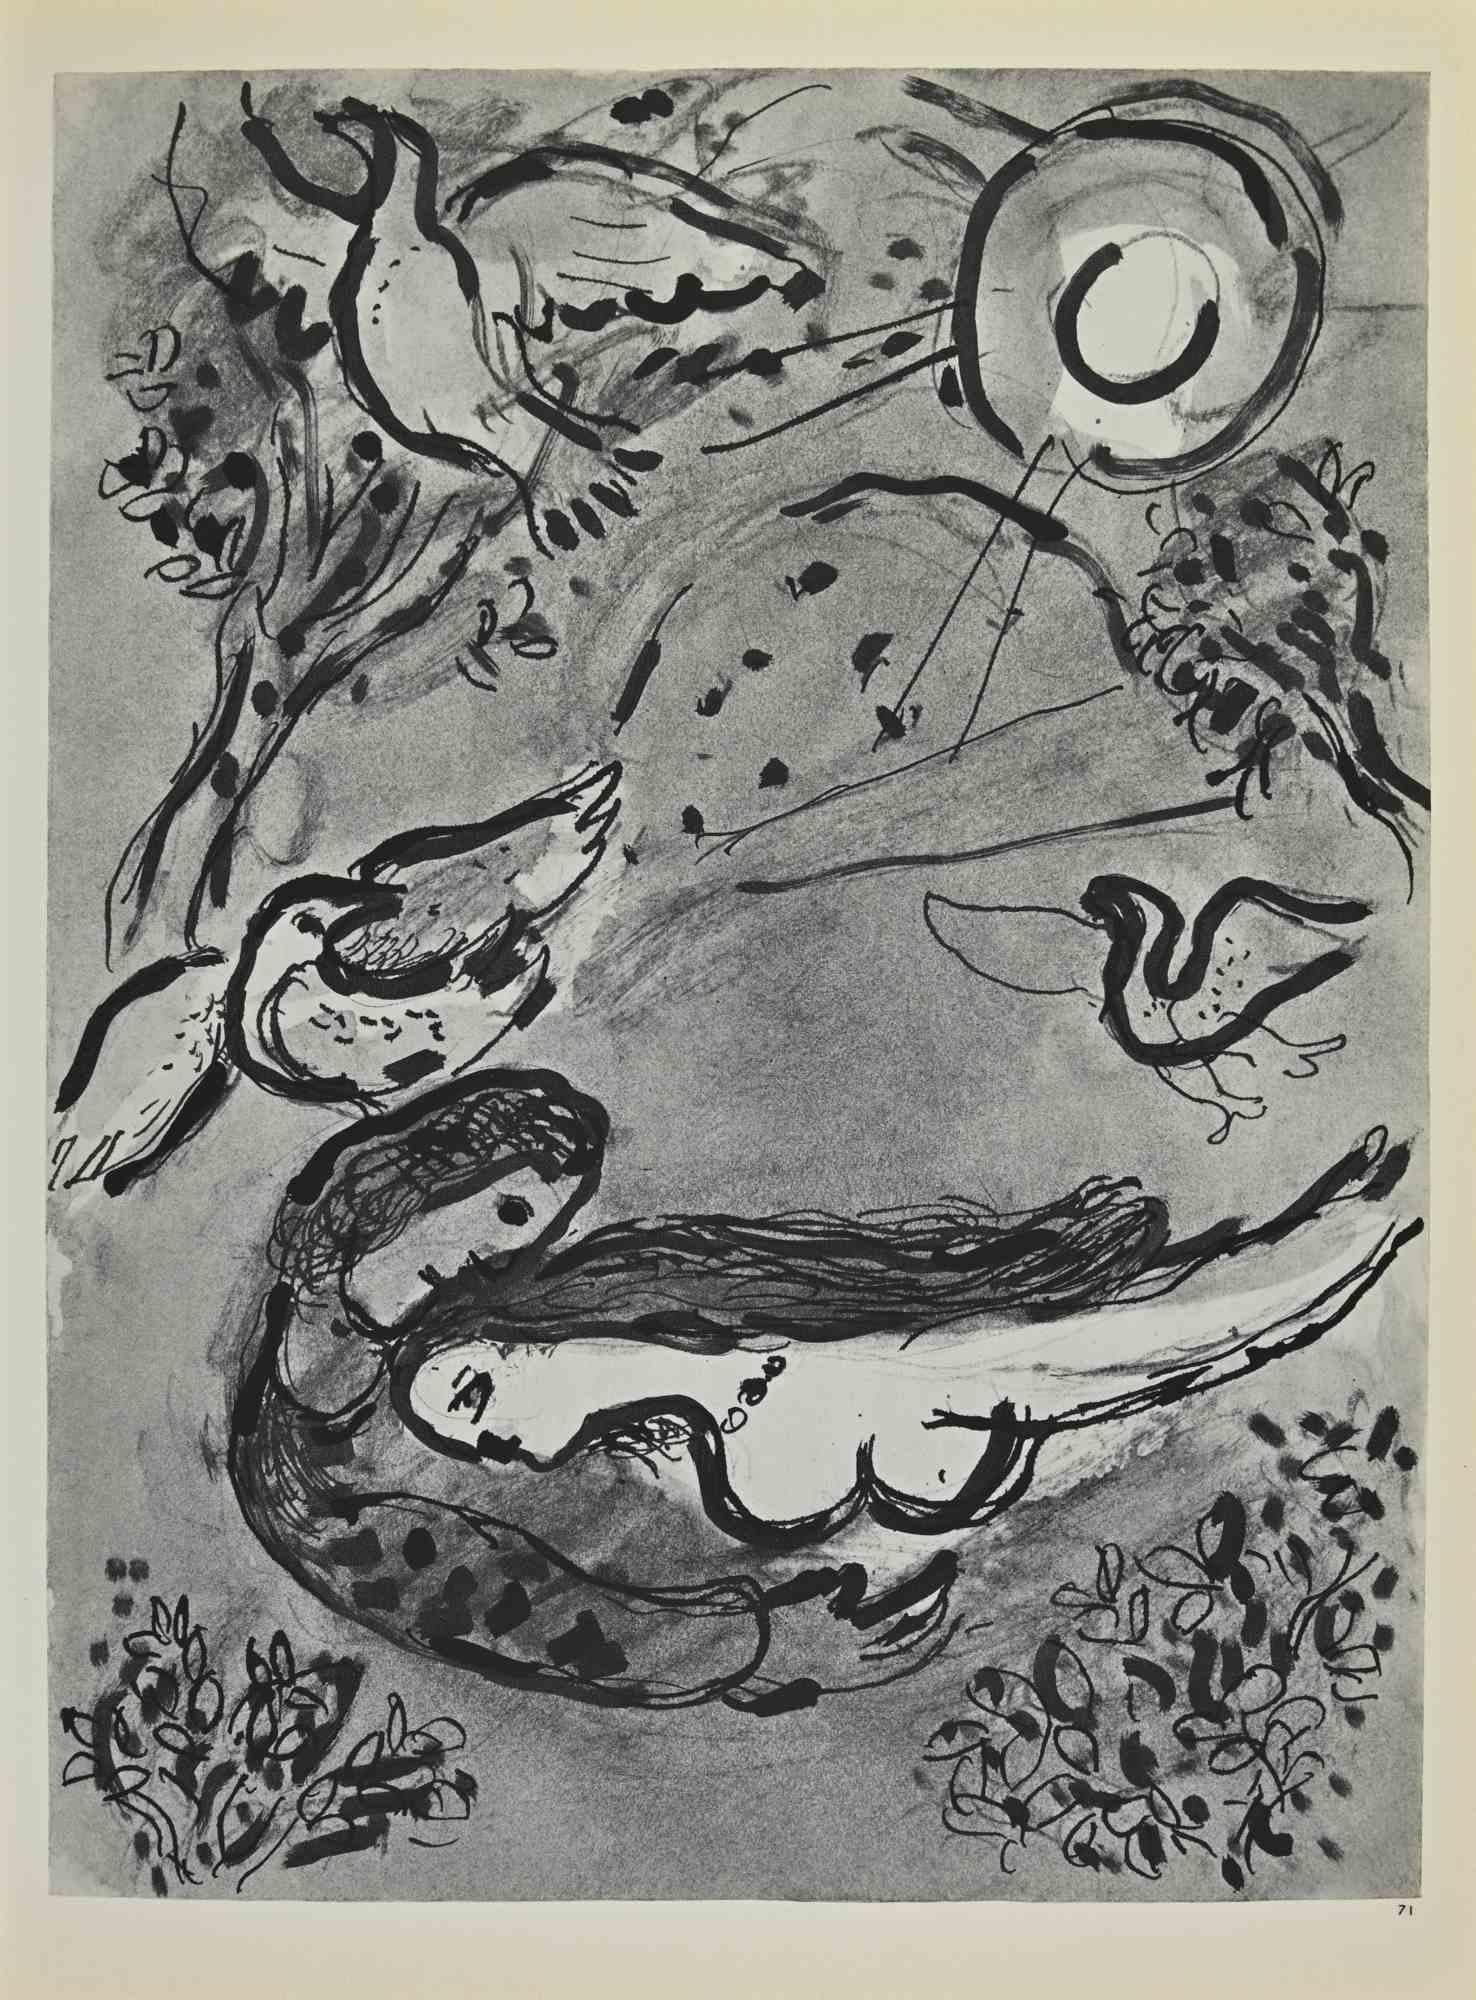 Song of Songs is an artwork realized by Marc Chagall, 1960s.

Lithograph on brown-toned paper, no signature.

Lithograph on both sheets.

Edition of 6500 unsigned lithographs. Printed by Mourlot and published by Tériade, Paris.

Ref. Mourlot, F.,